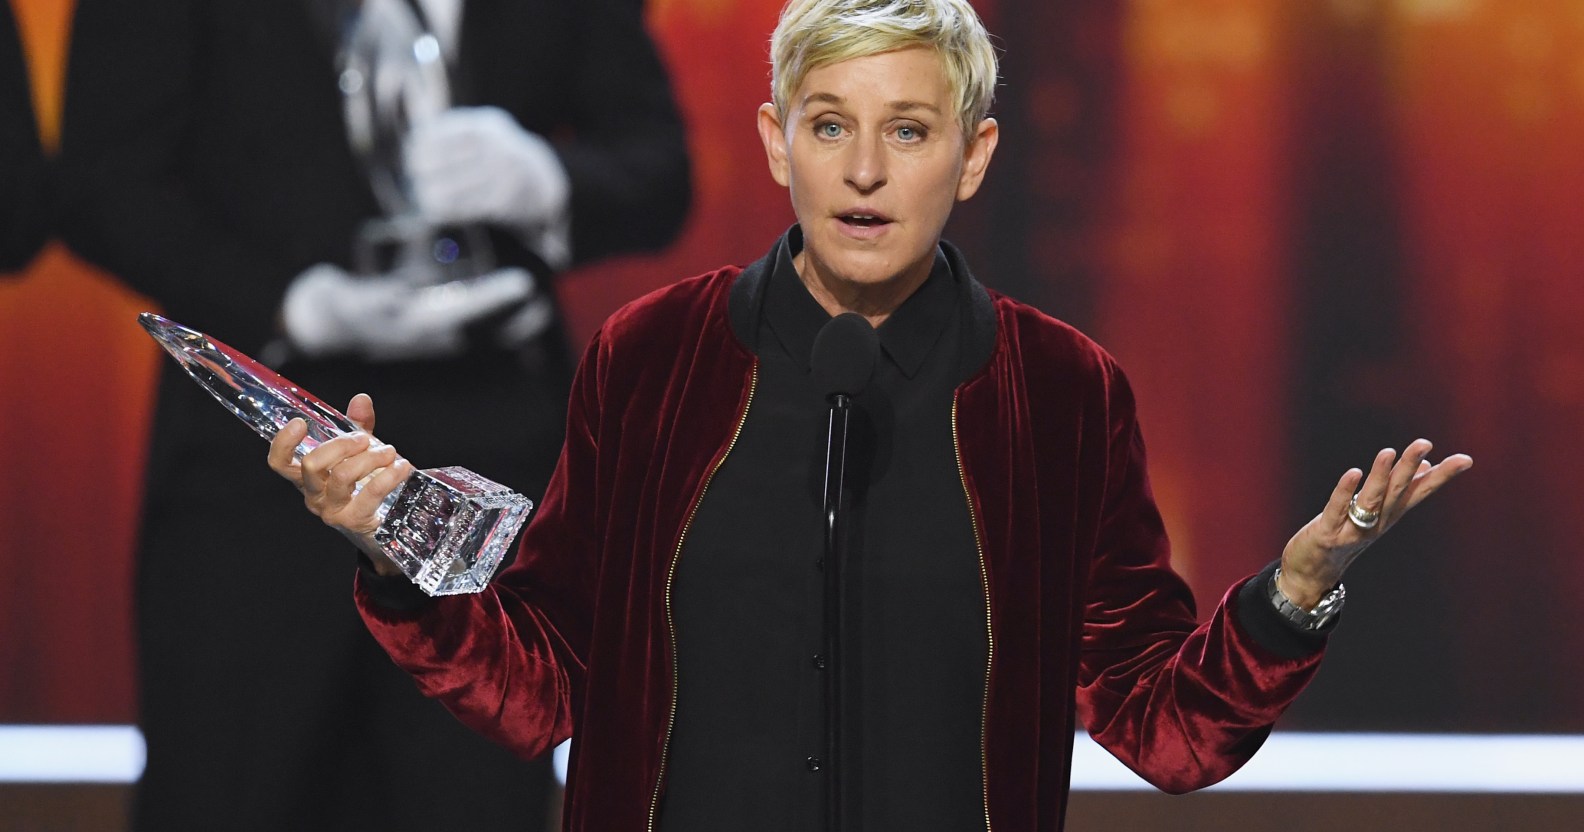 LOS ANGELES, CA - JANUARY 18: Actress/TV host Ellen DeGeneres accepts Favorite Animated Movie Voice for 'Finding Dory' onstage during the People's Choice Awards 2017 at Microsoft Theater on January 18, 2017 in Los Angeles, California. (Photo by Kevin Winter/Getty Images)